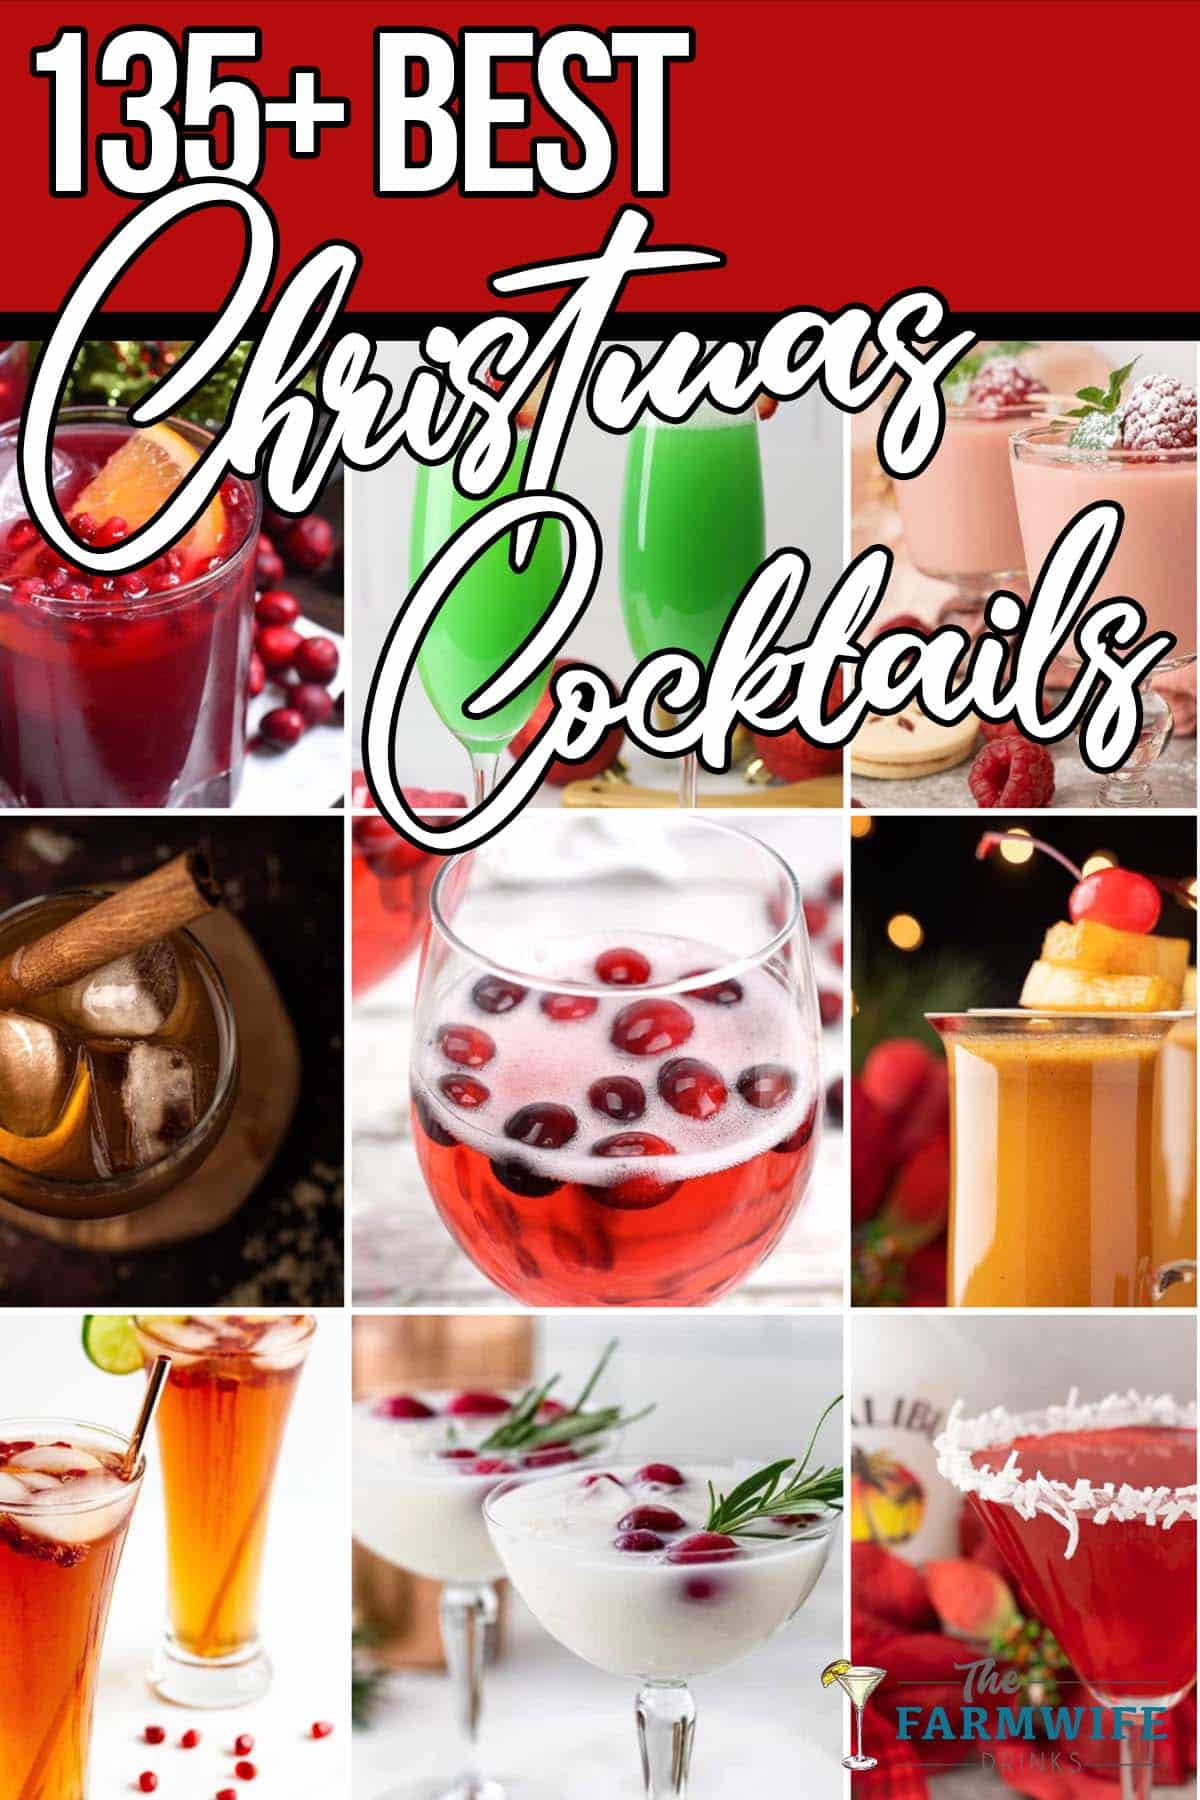 photo collage of christmas drink recipes with text which reads 135+ best christmas cocktails